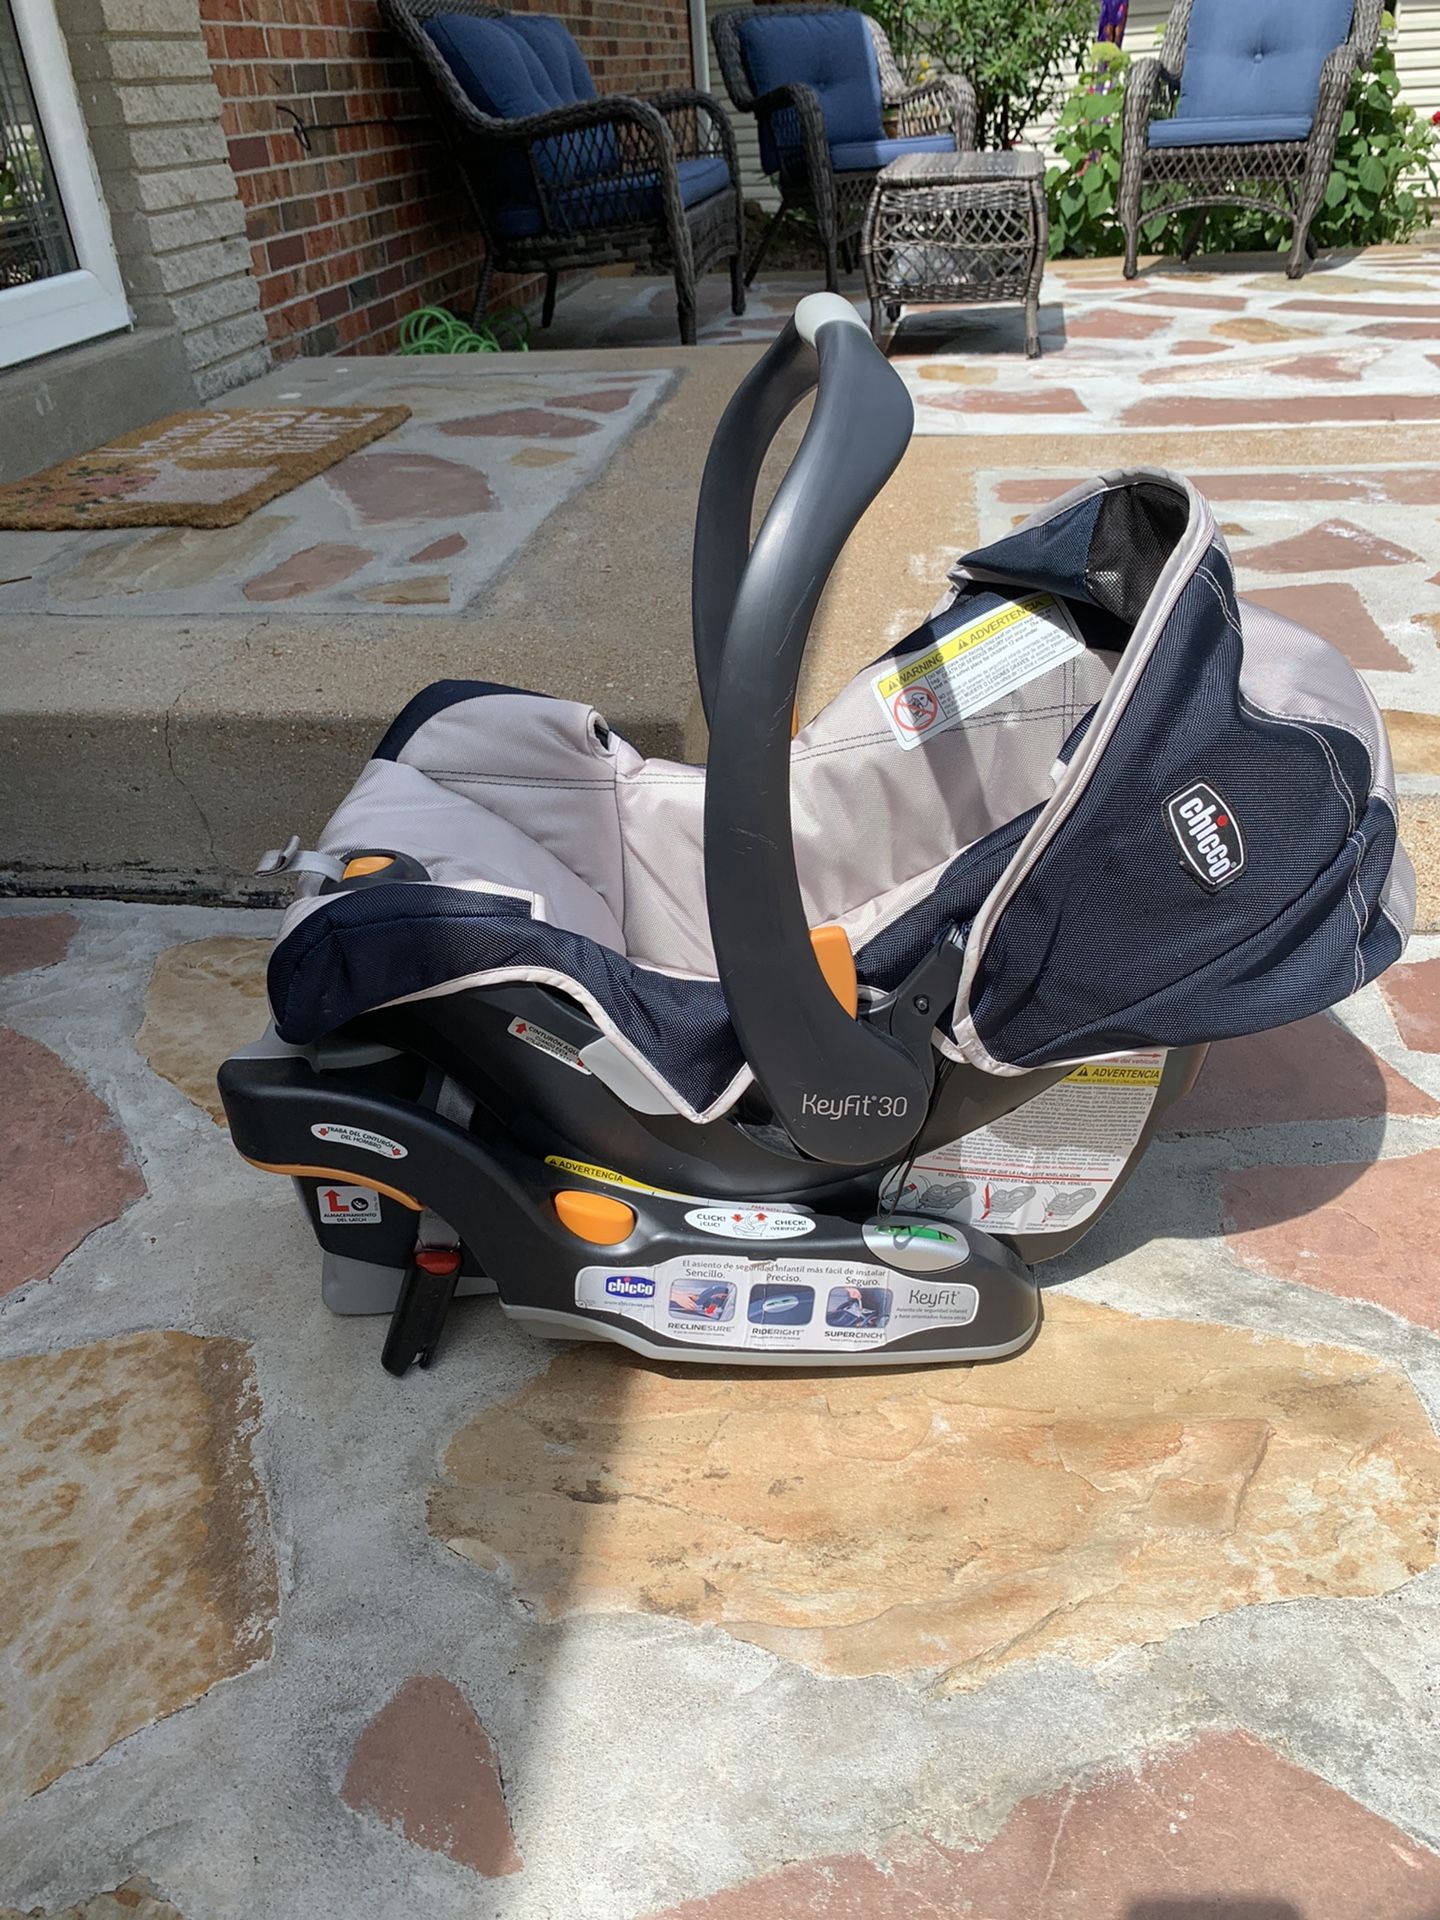 CHICCO KEYFIT30 seat and base